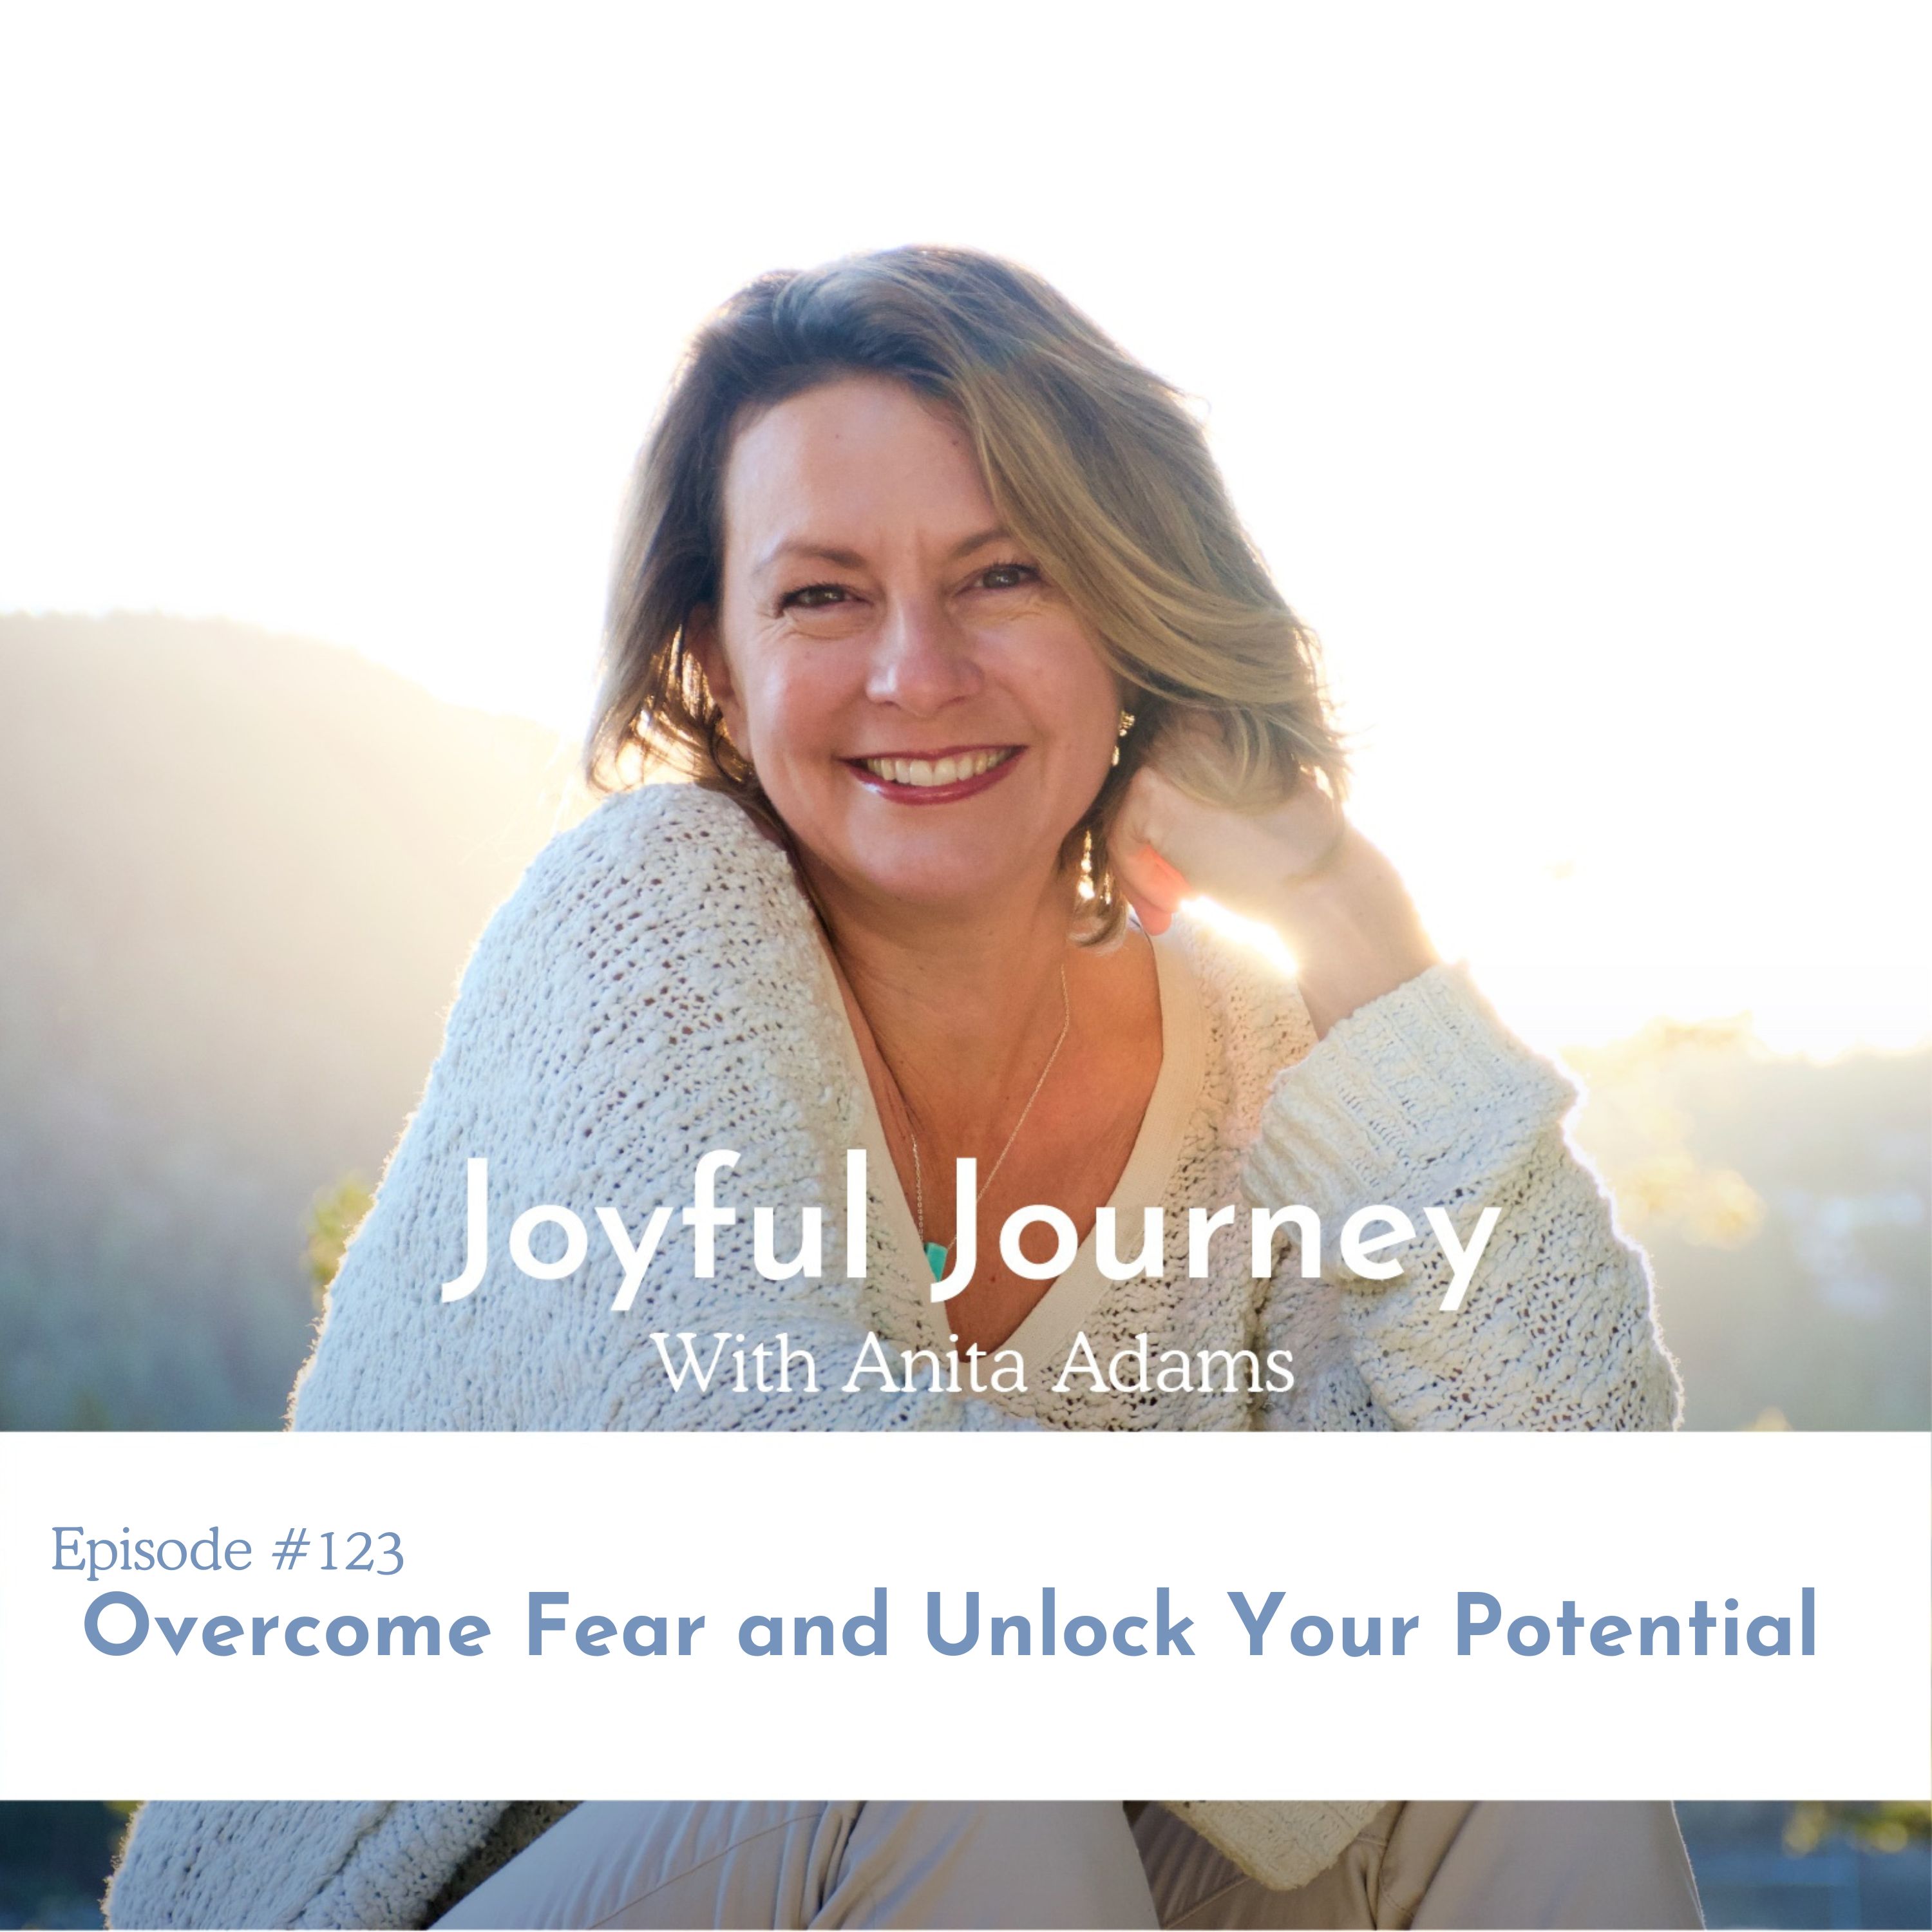 Overcome Fear and Unlock Your Potential